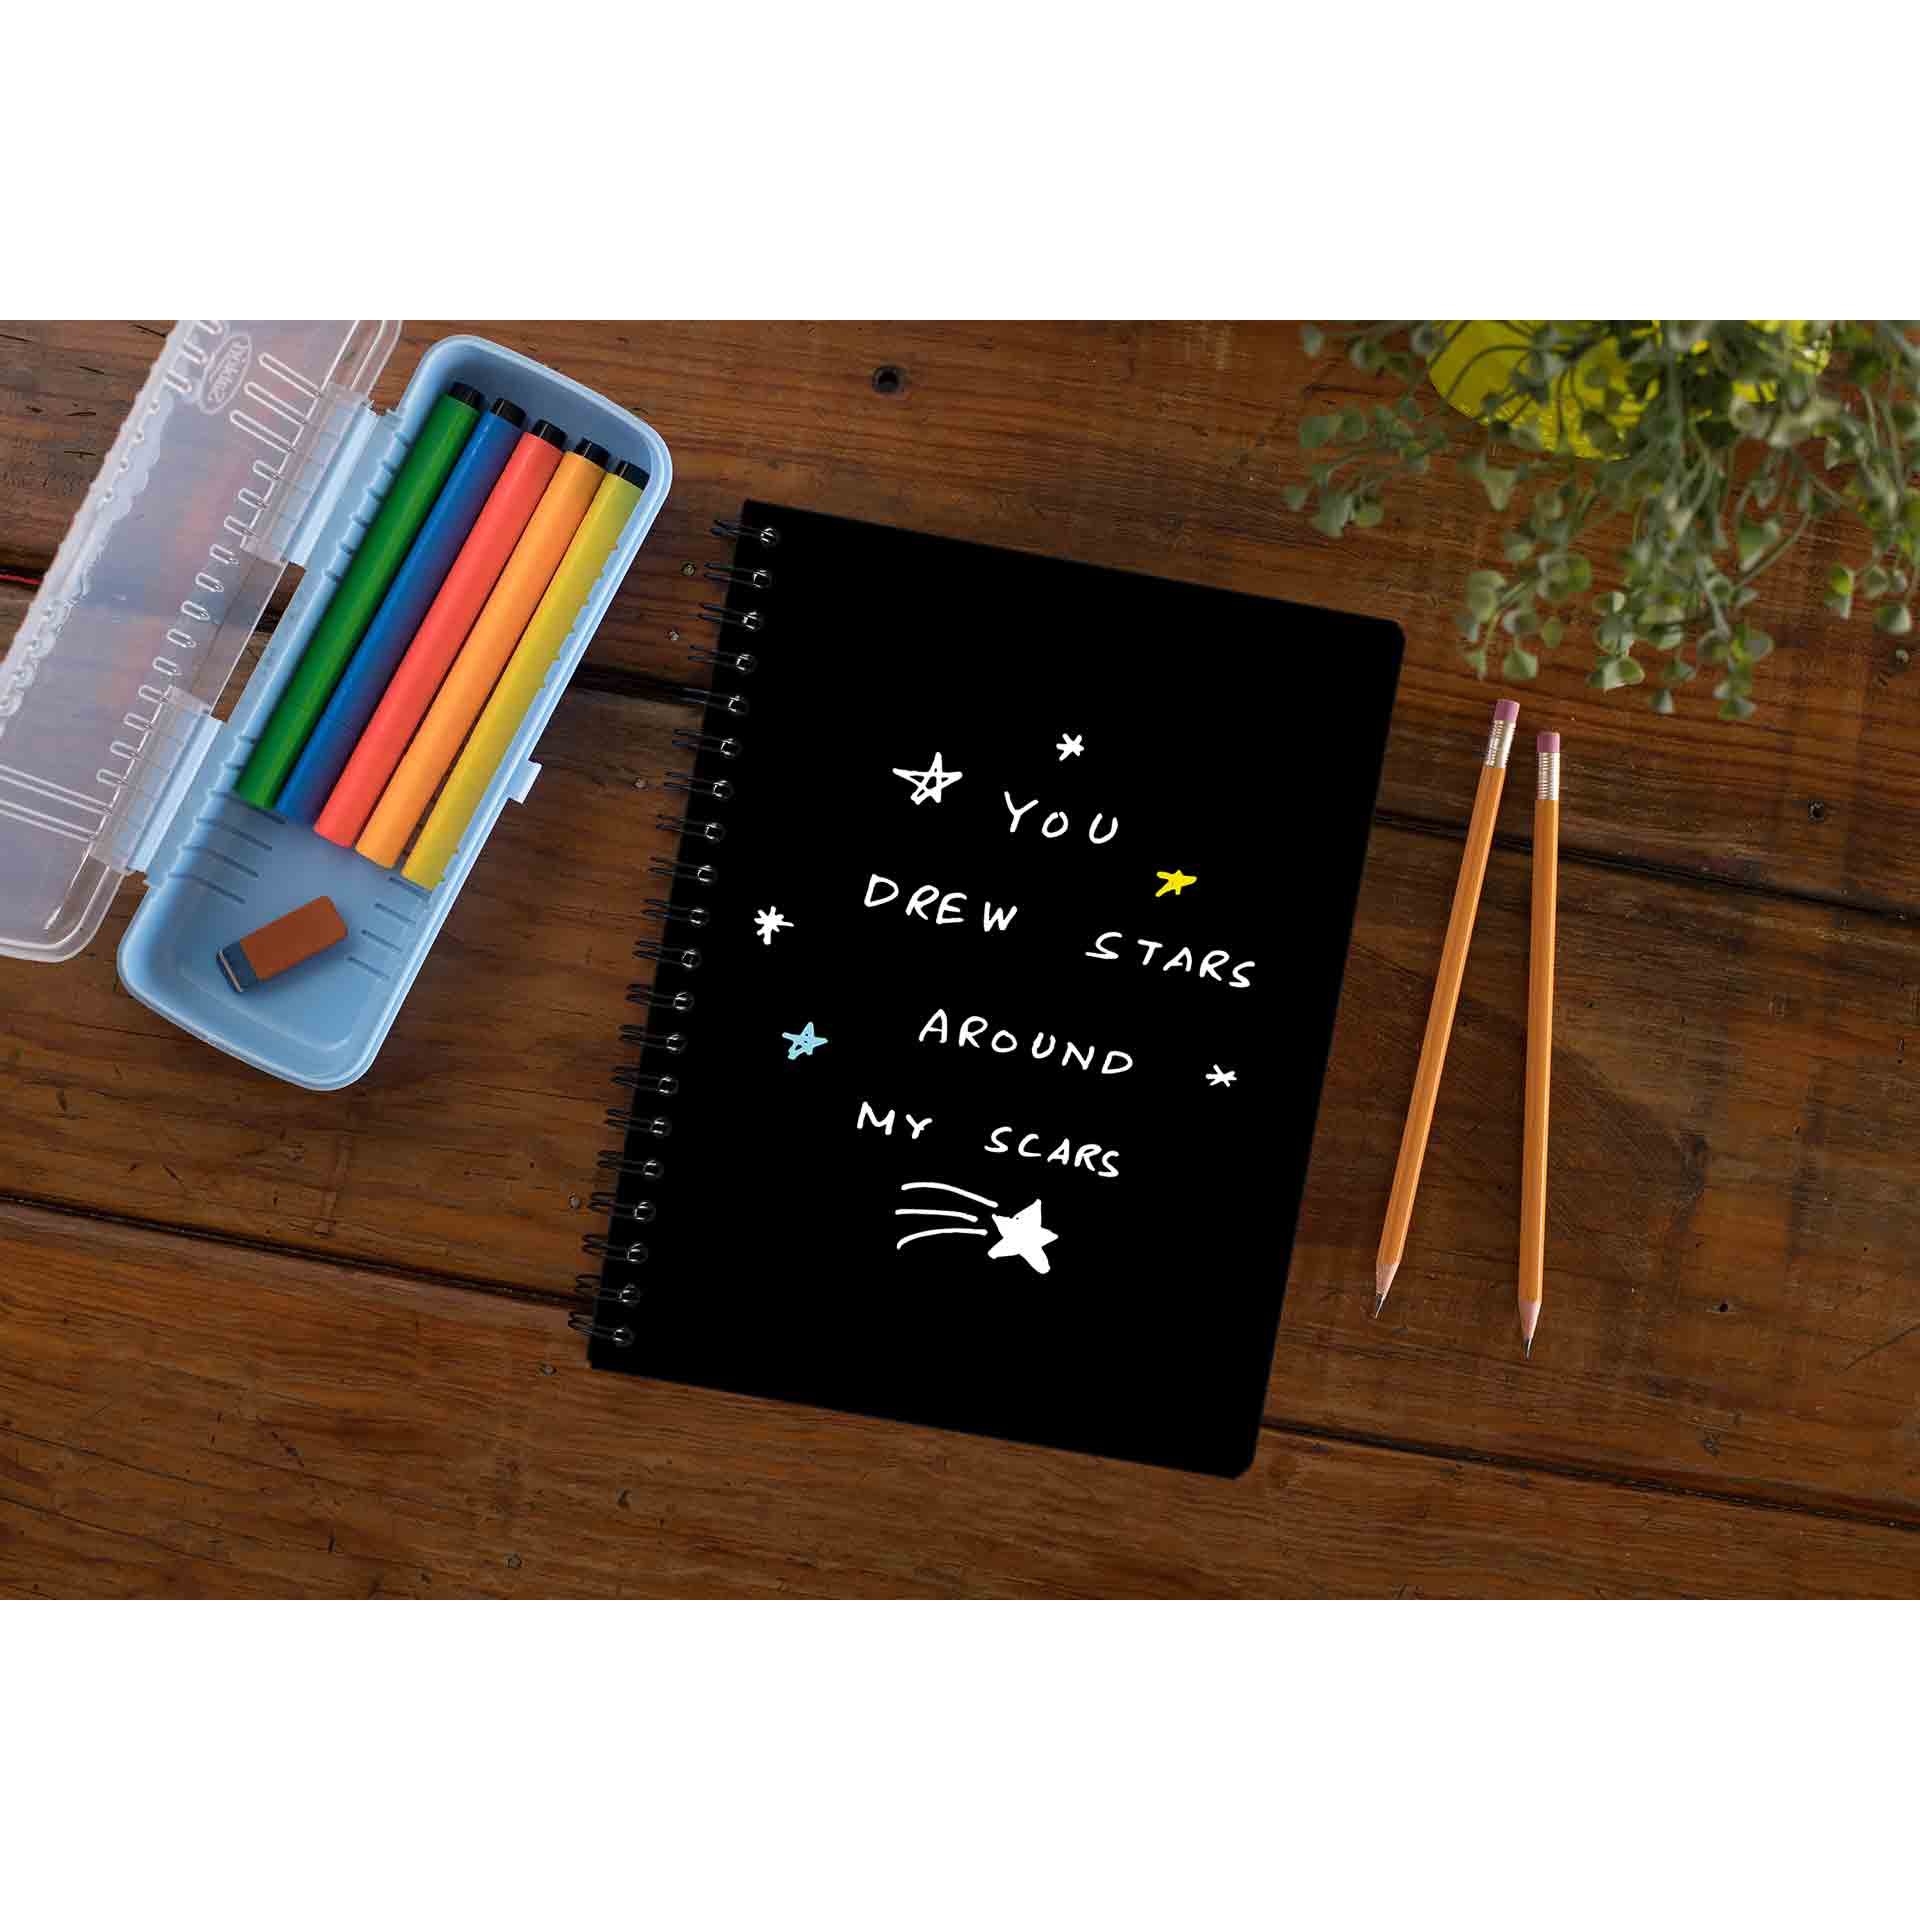 taylor swift cardigan notebook notepad diary buy online india the banyan tee tbt unruled you drew stars around my scars